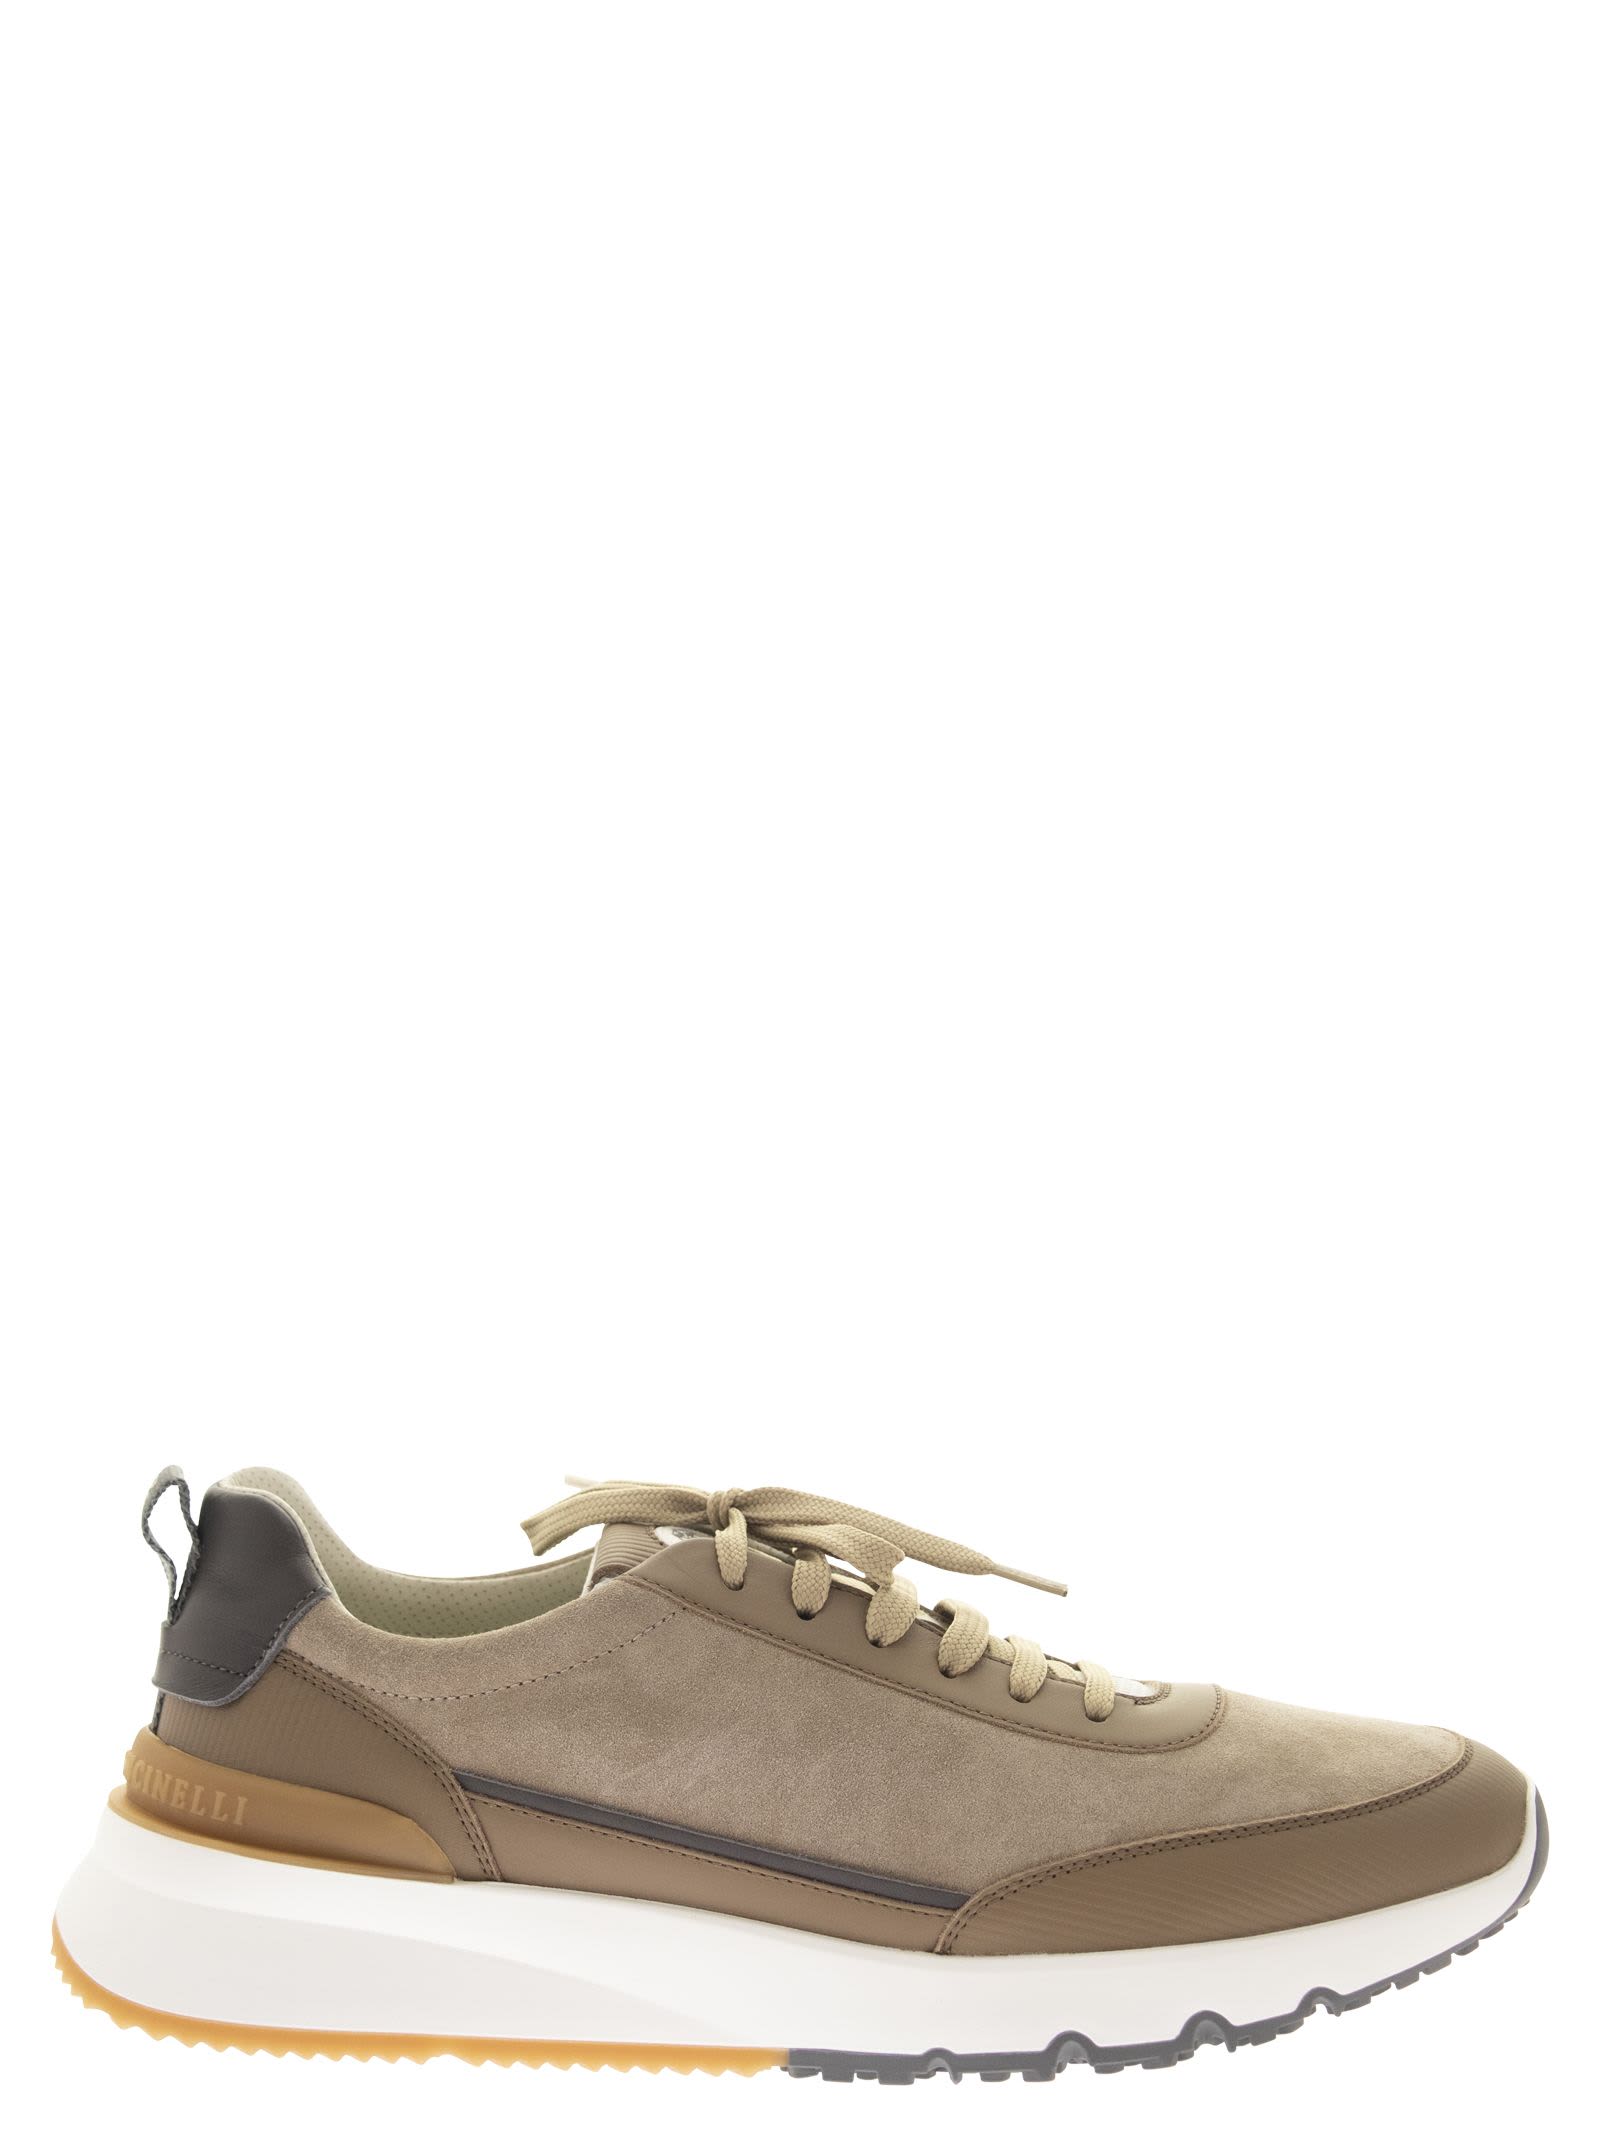 Brunello Cucinelli Washed Suede And Striped Calfskin Runners